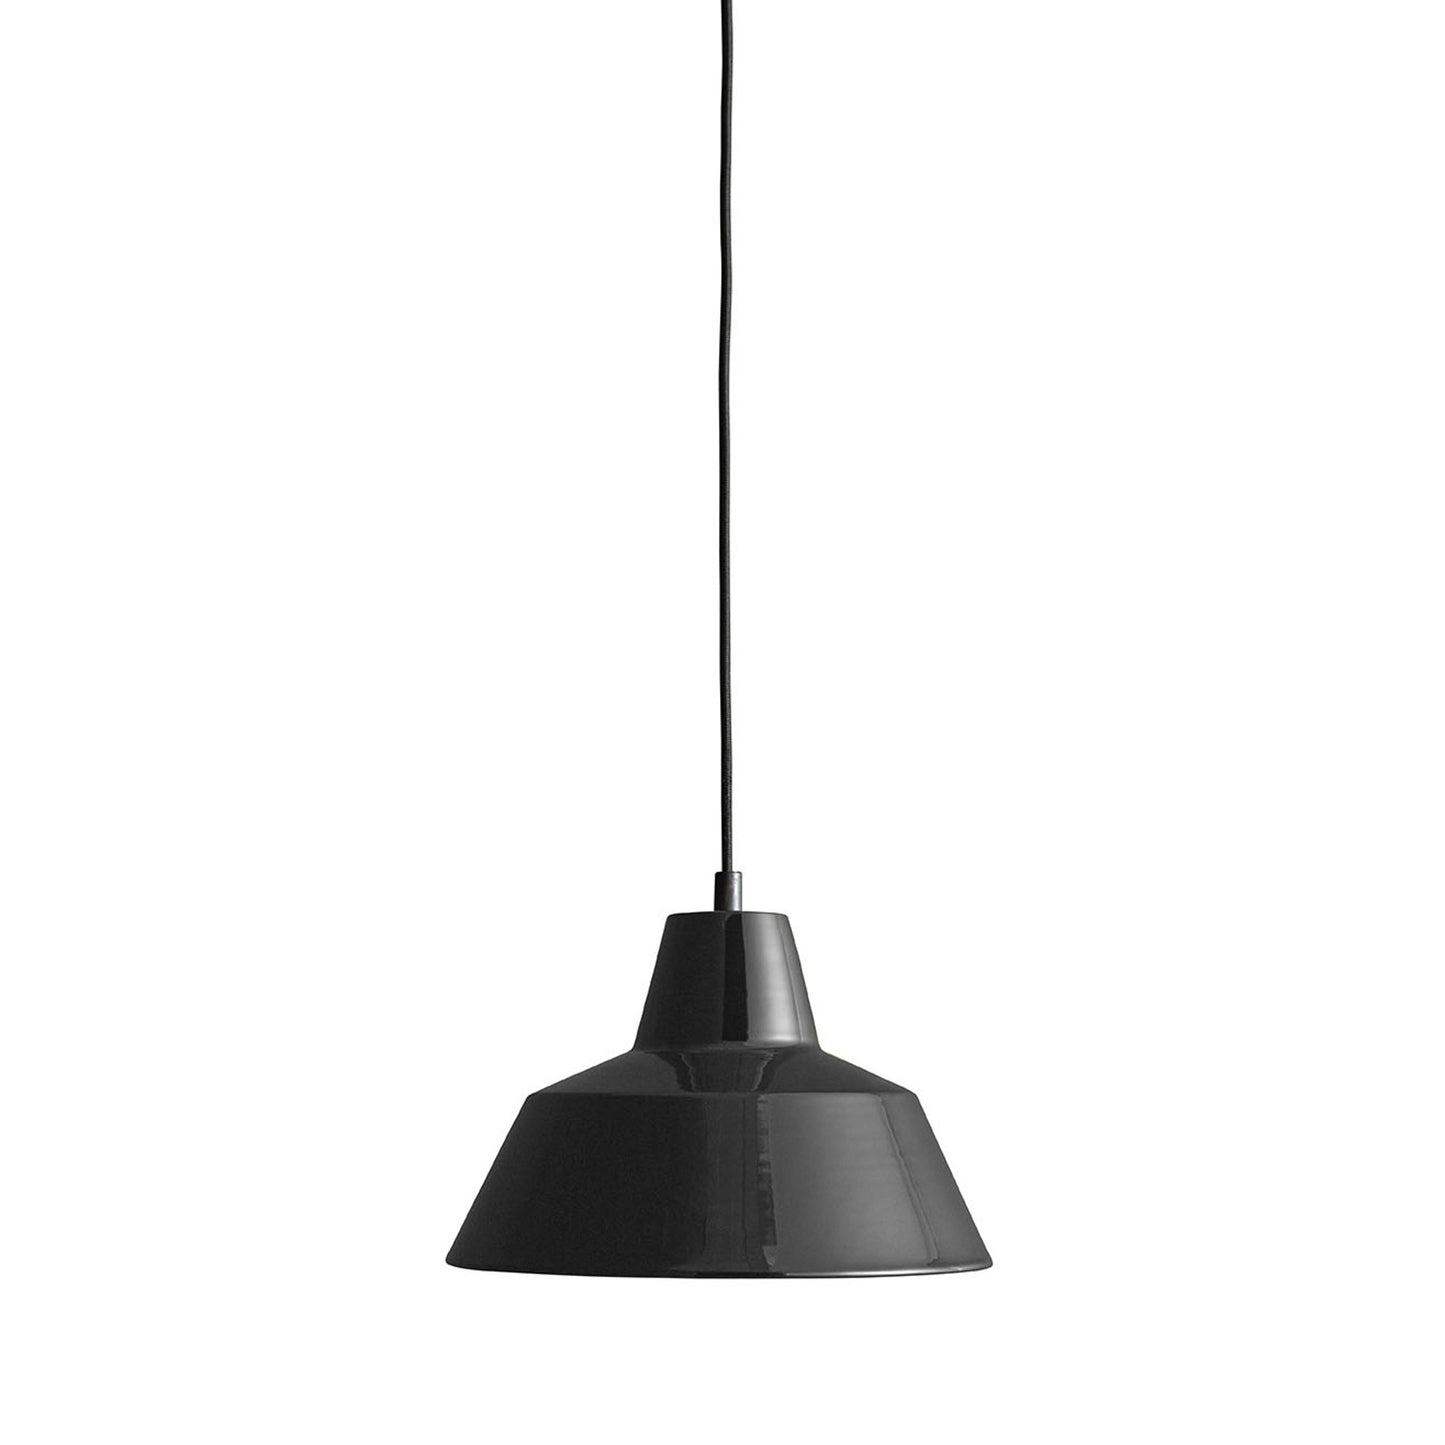 Workshop Lamp Pendant Lamp W2 by Made By Hand #Blank Black